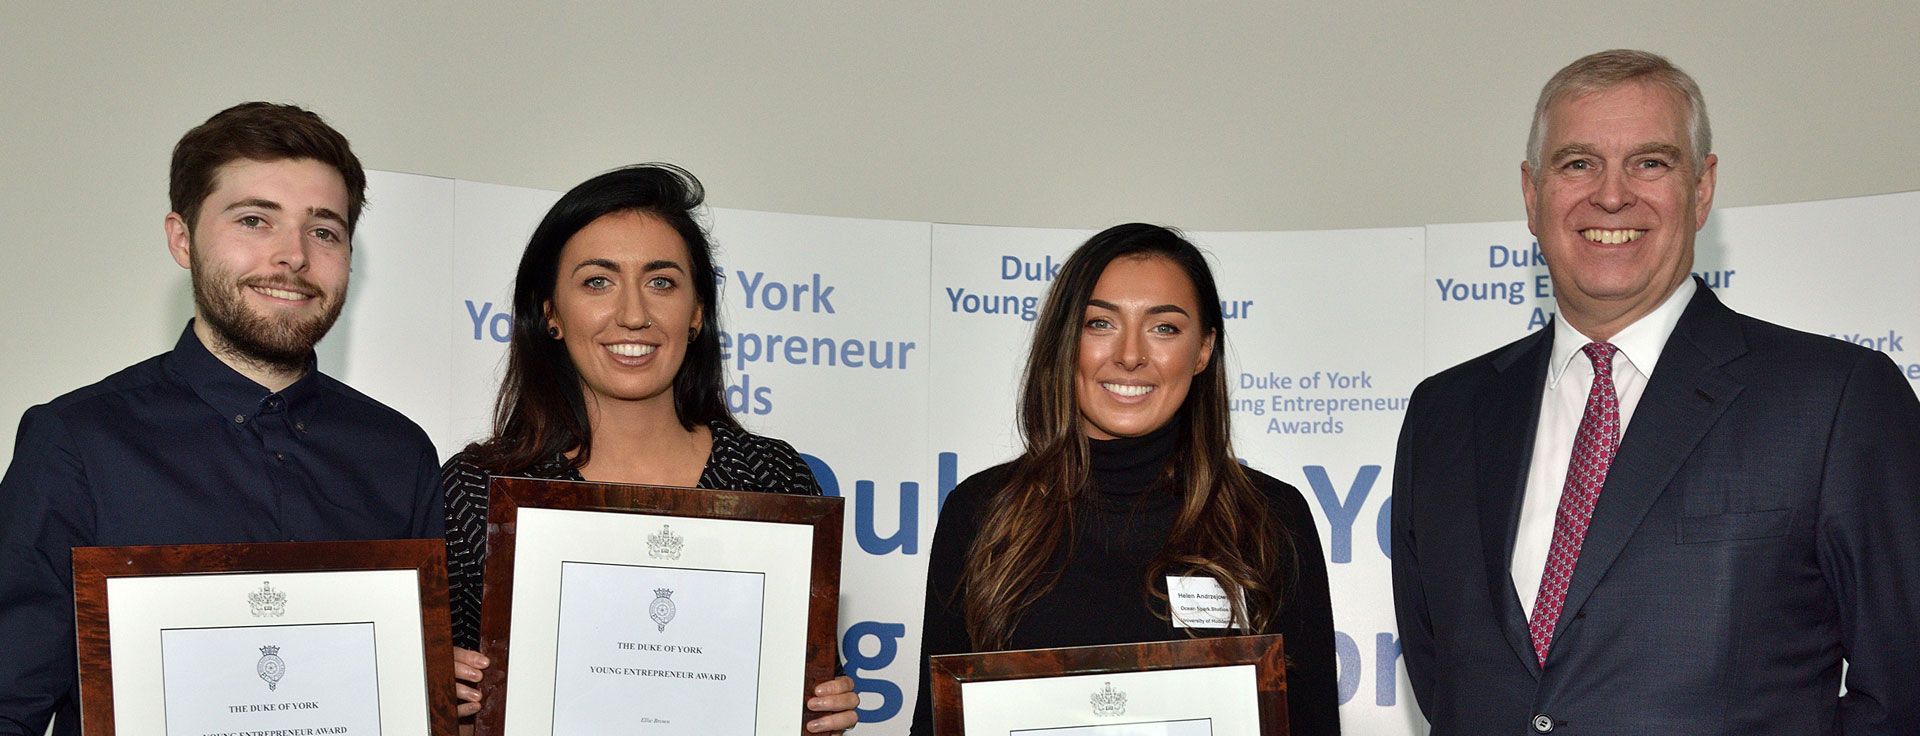 Huddersfield’s winners (l-r) Zachray Cundall, Ellie Brown and Helen Andrzejowska, who comprise Ocean Spark Studios, receiving their certificates from the University's Chancellor, HRH The Duke of York